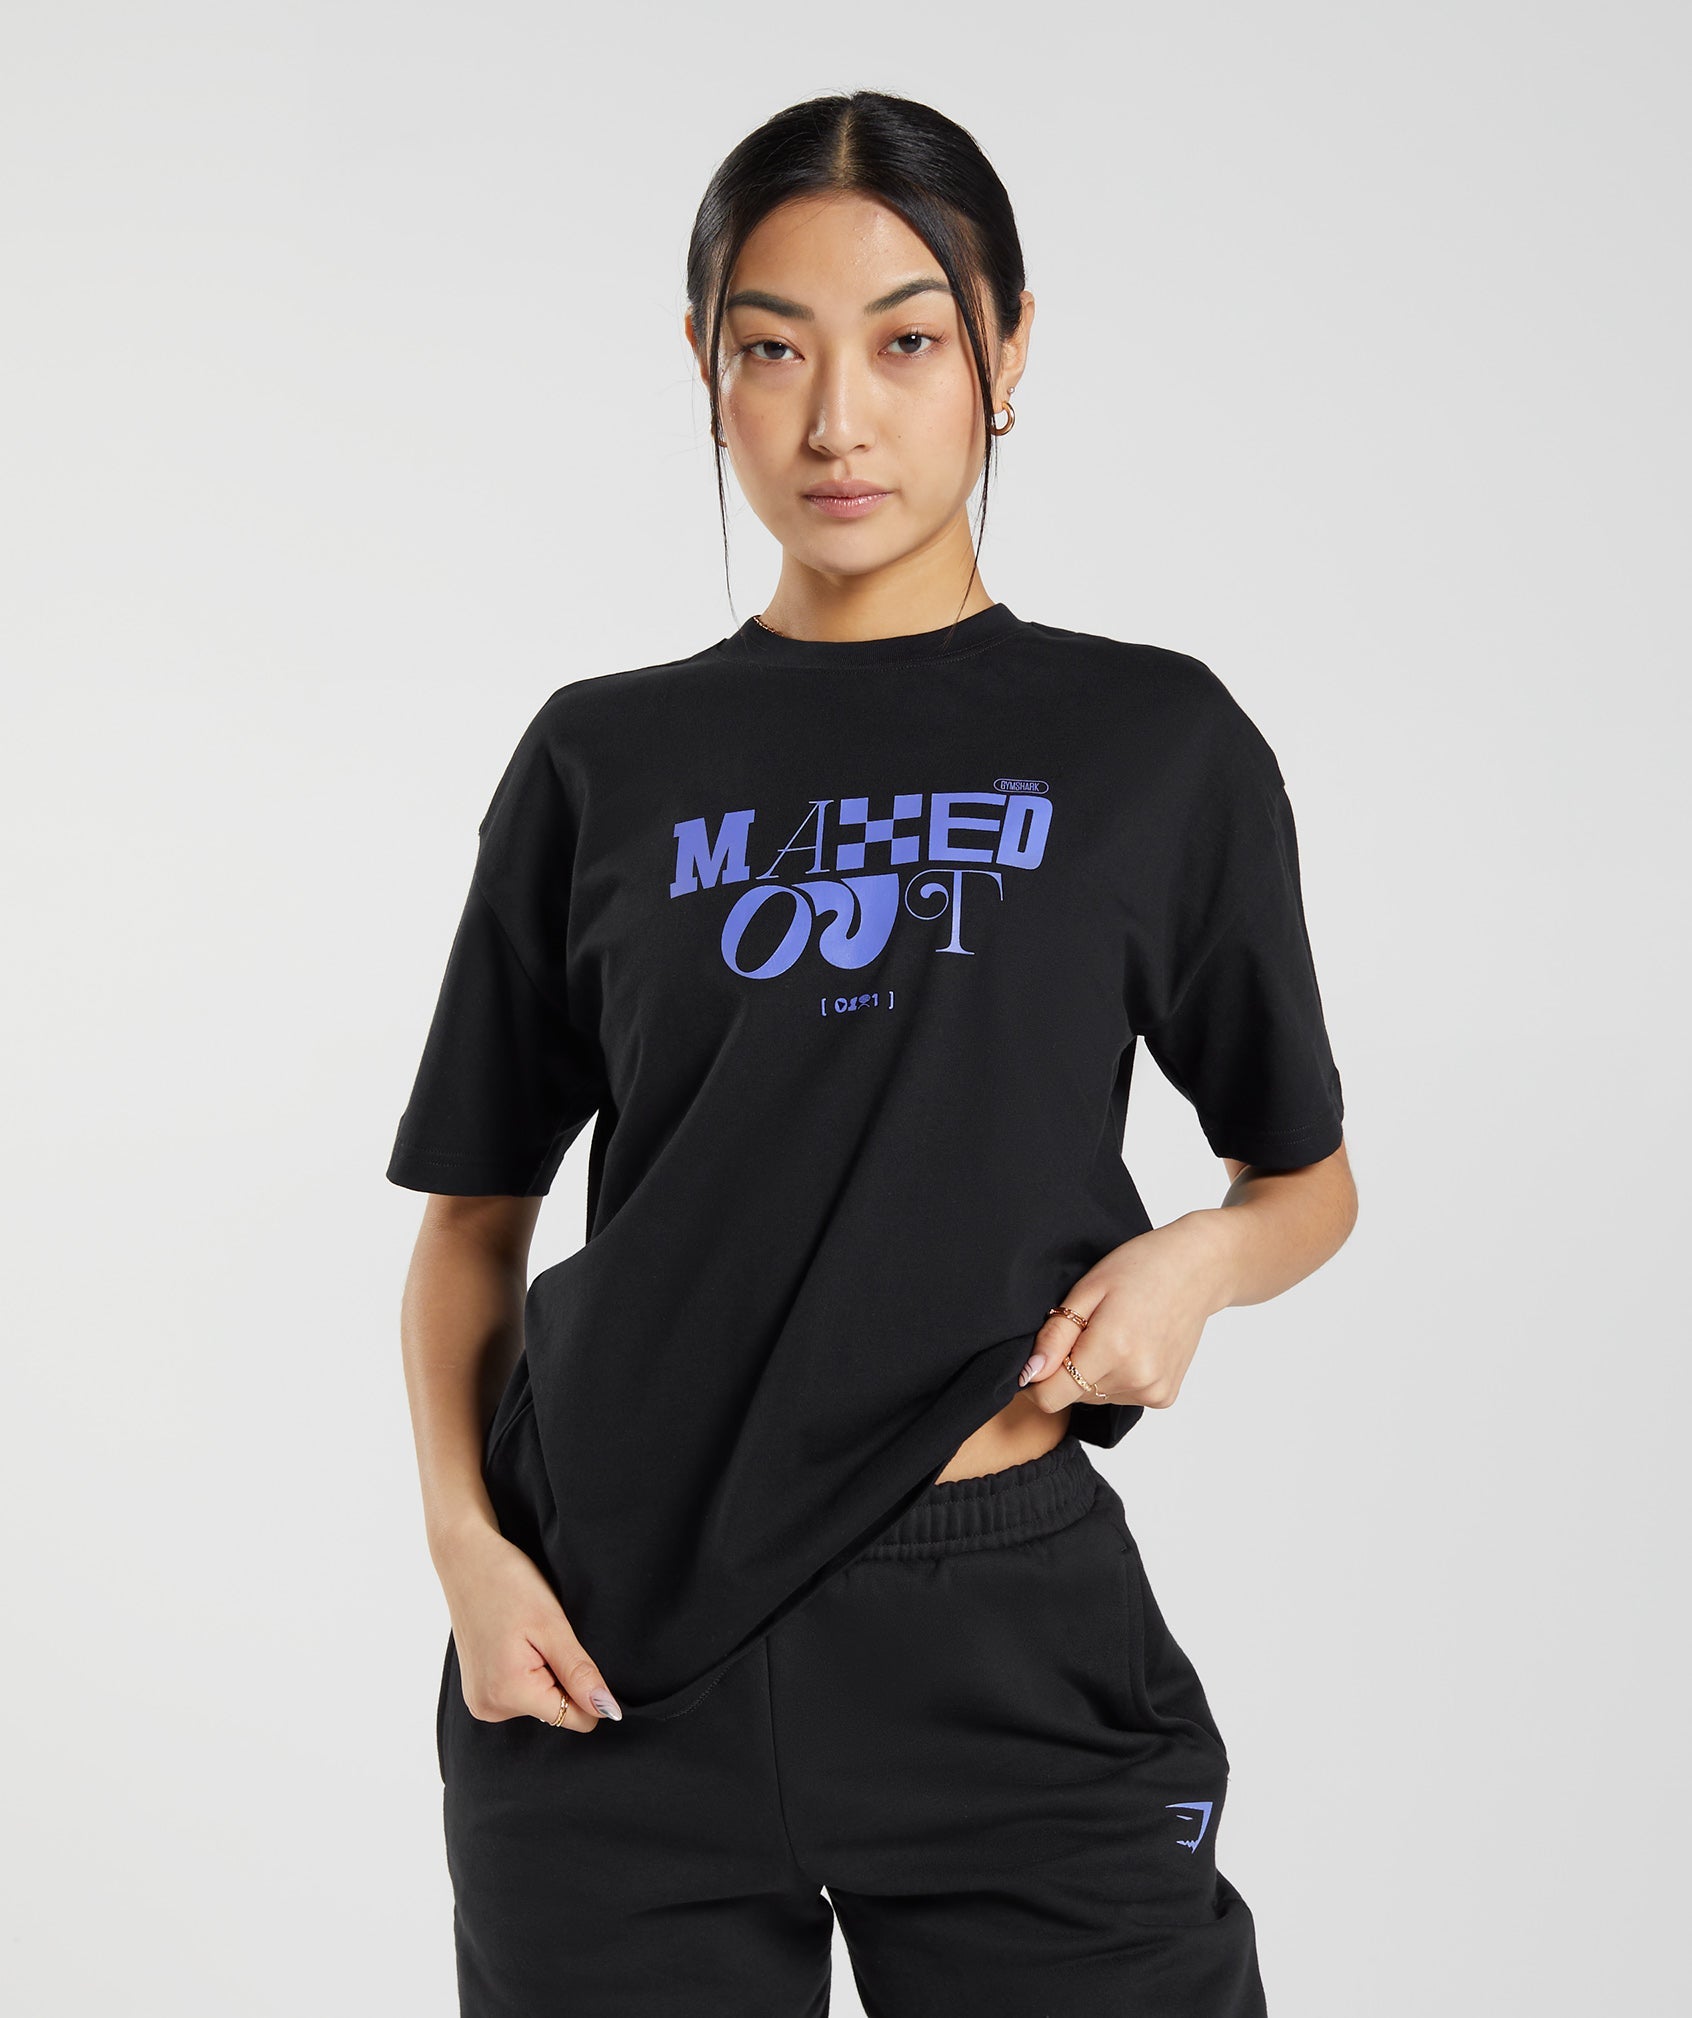 Maxed Out Oversized T-Shirt in Black